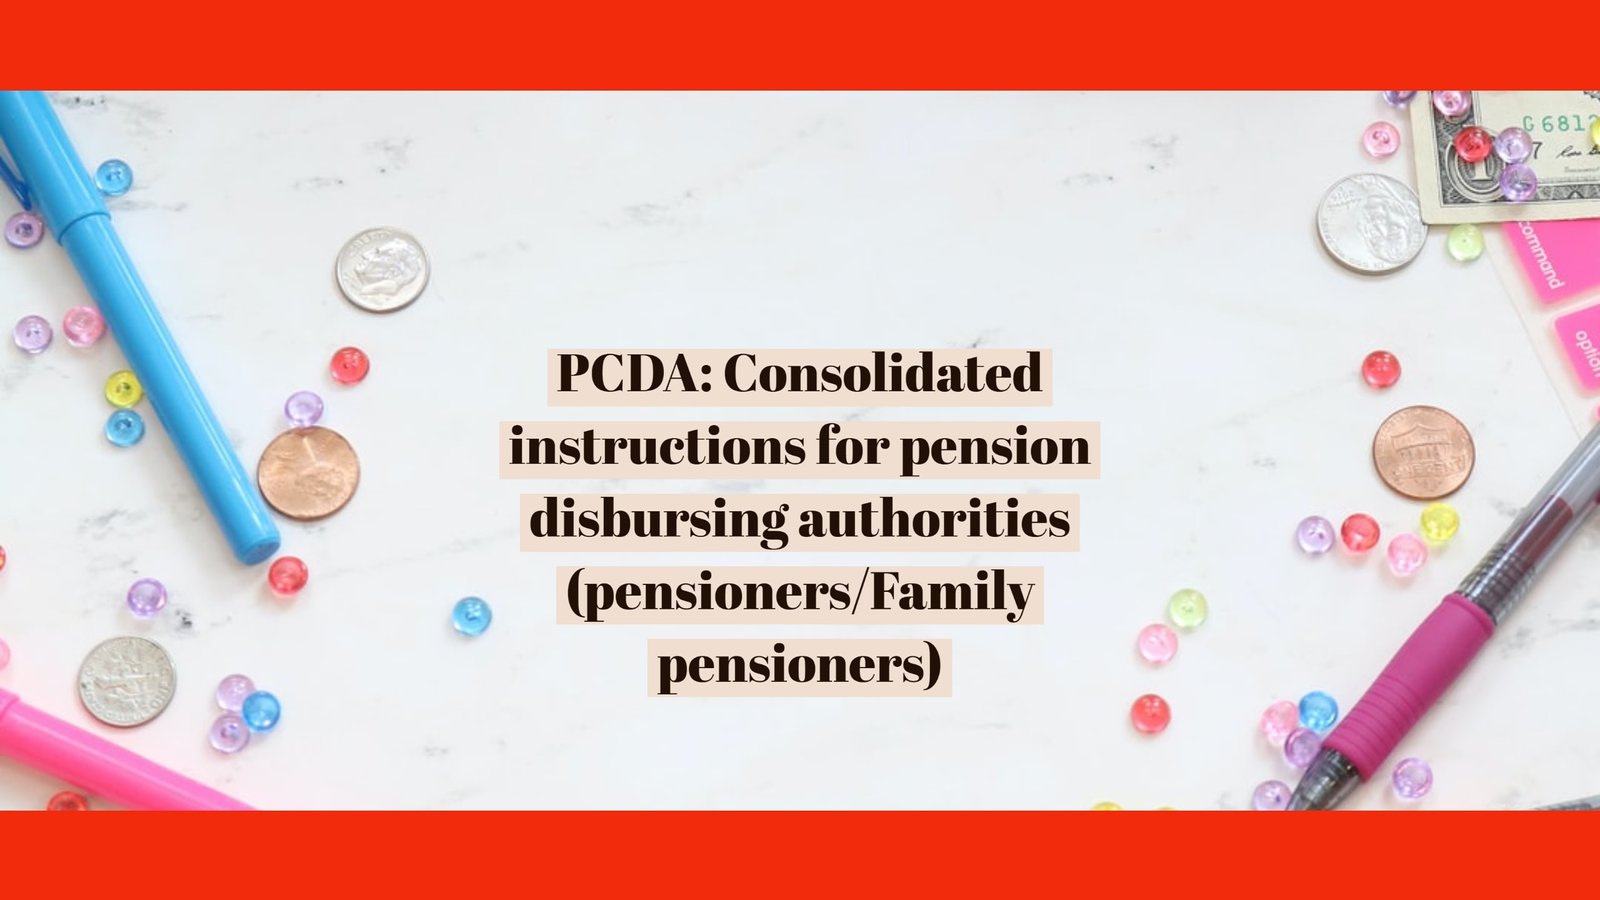 PCDA- Consolidated instructions for pension disbursing authorities(pensioners/Family pensioners)